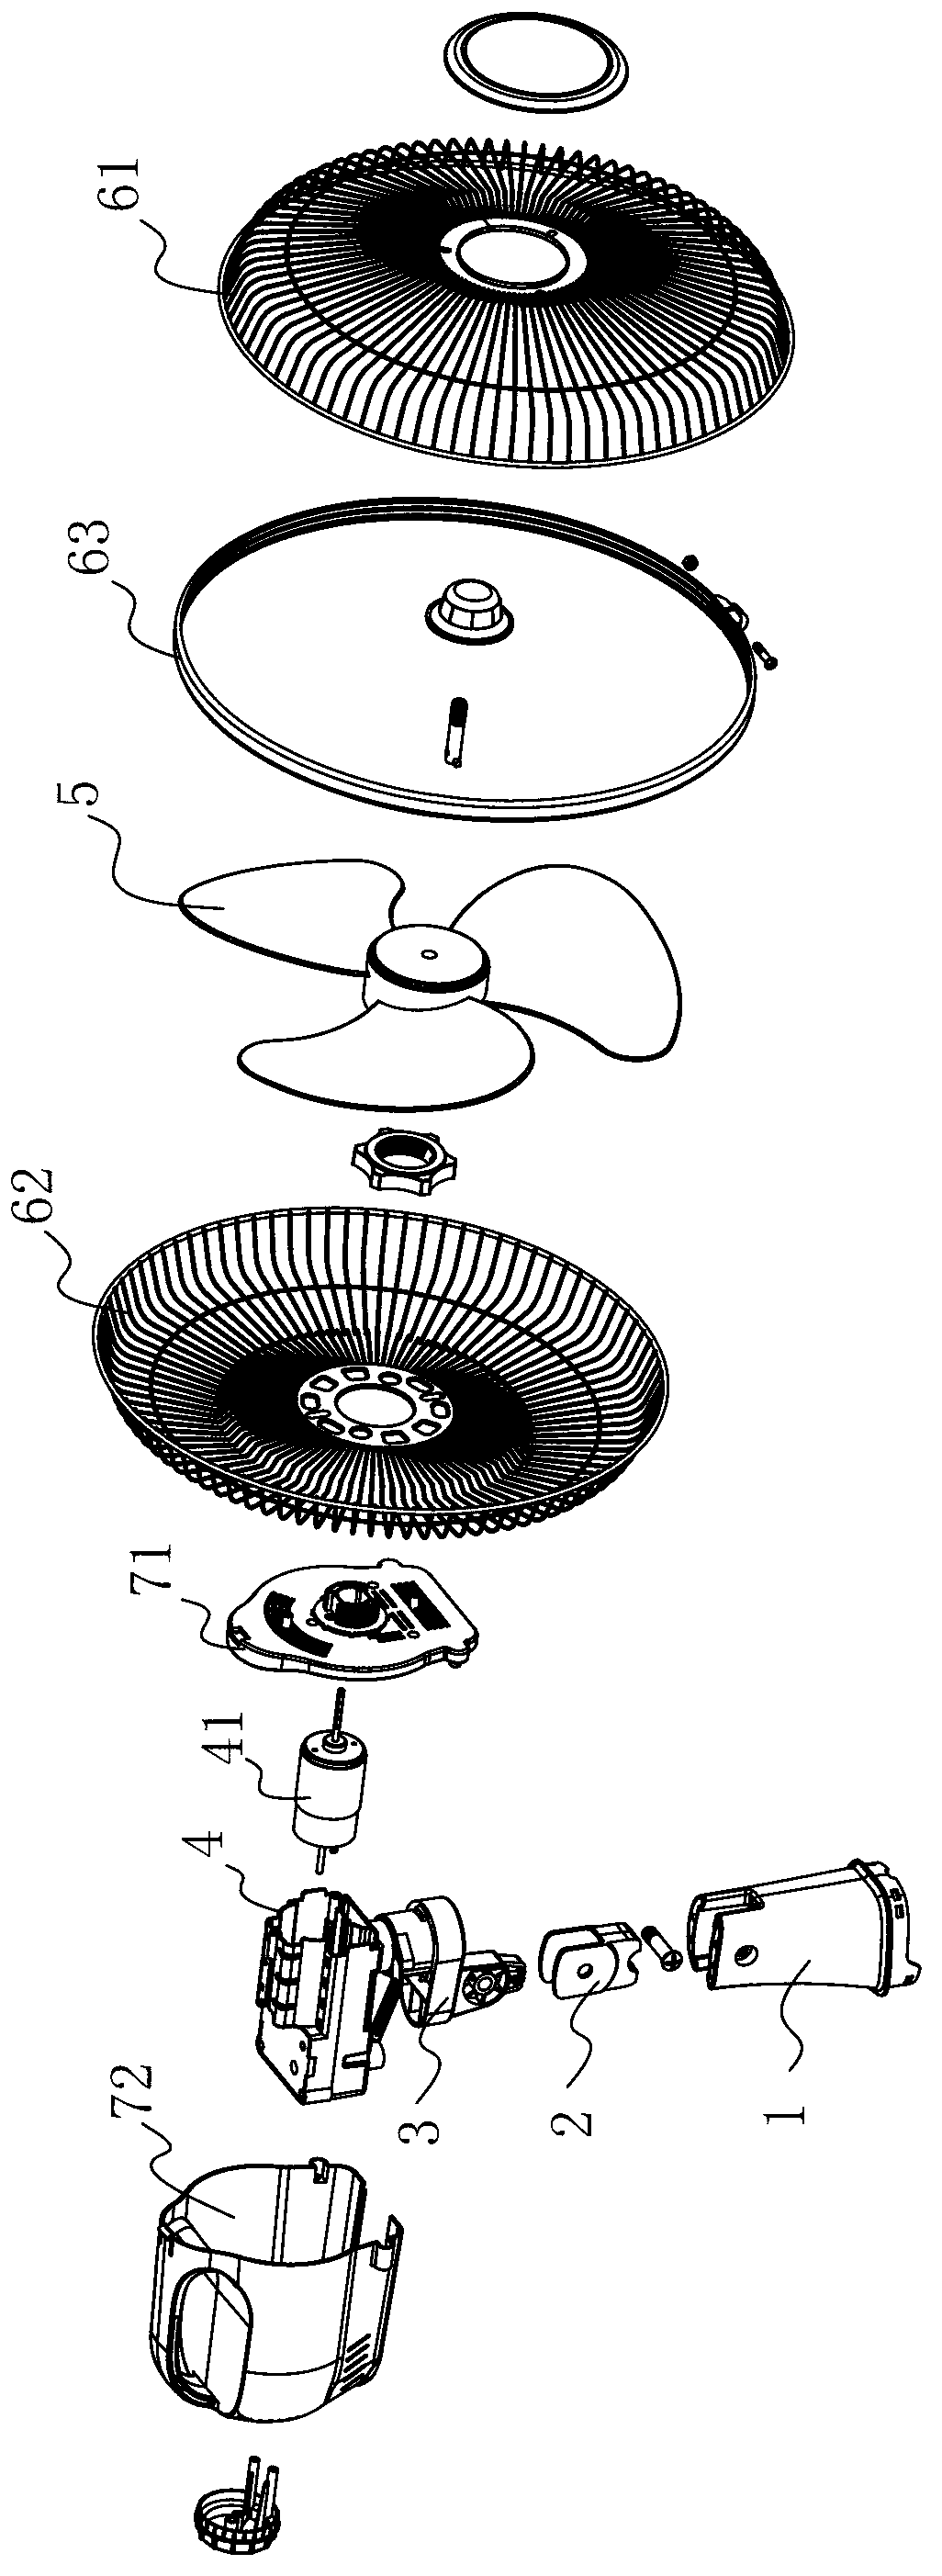 Electric fan with adjustable pitching angle